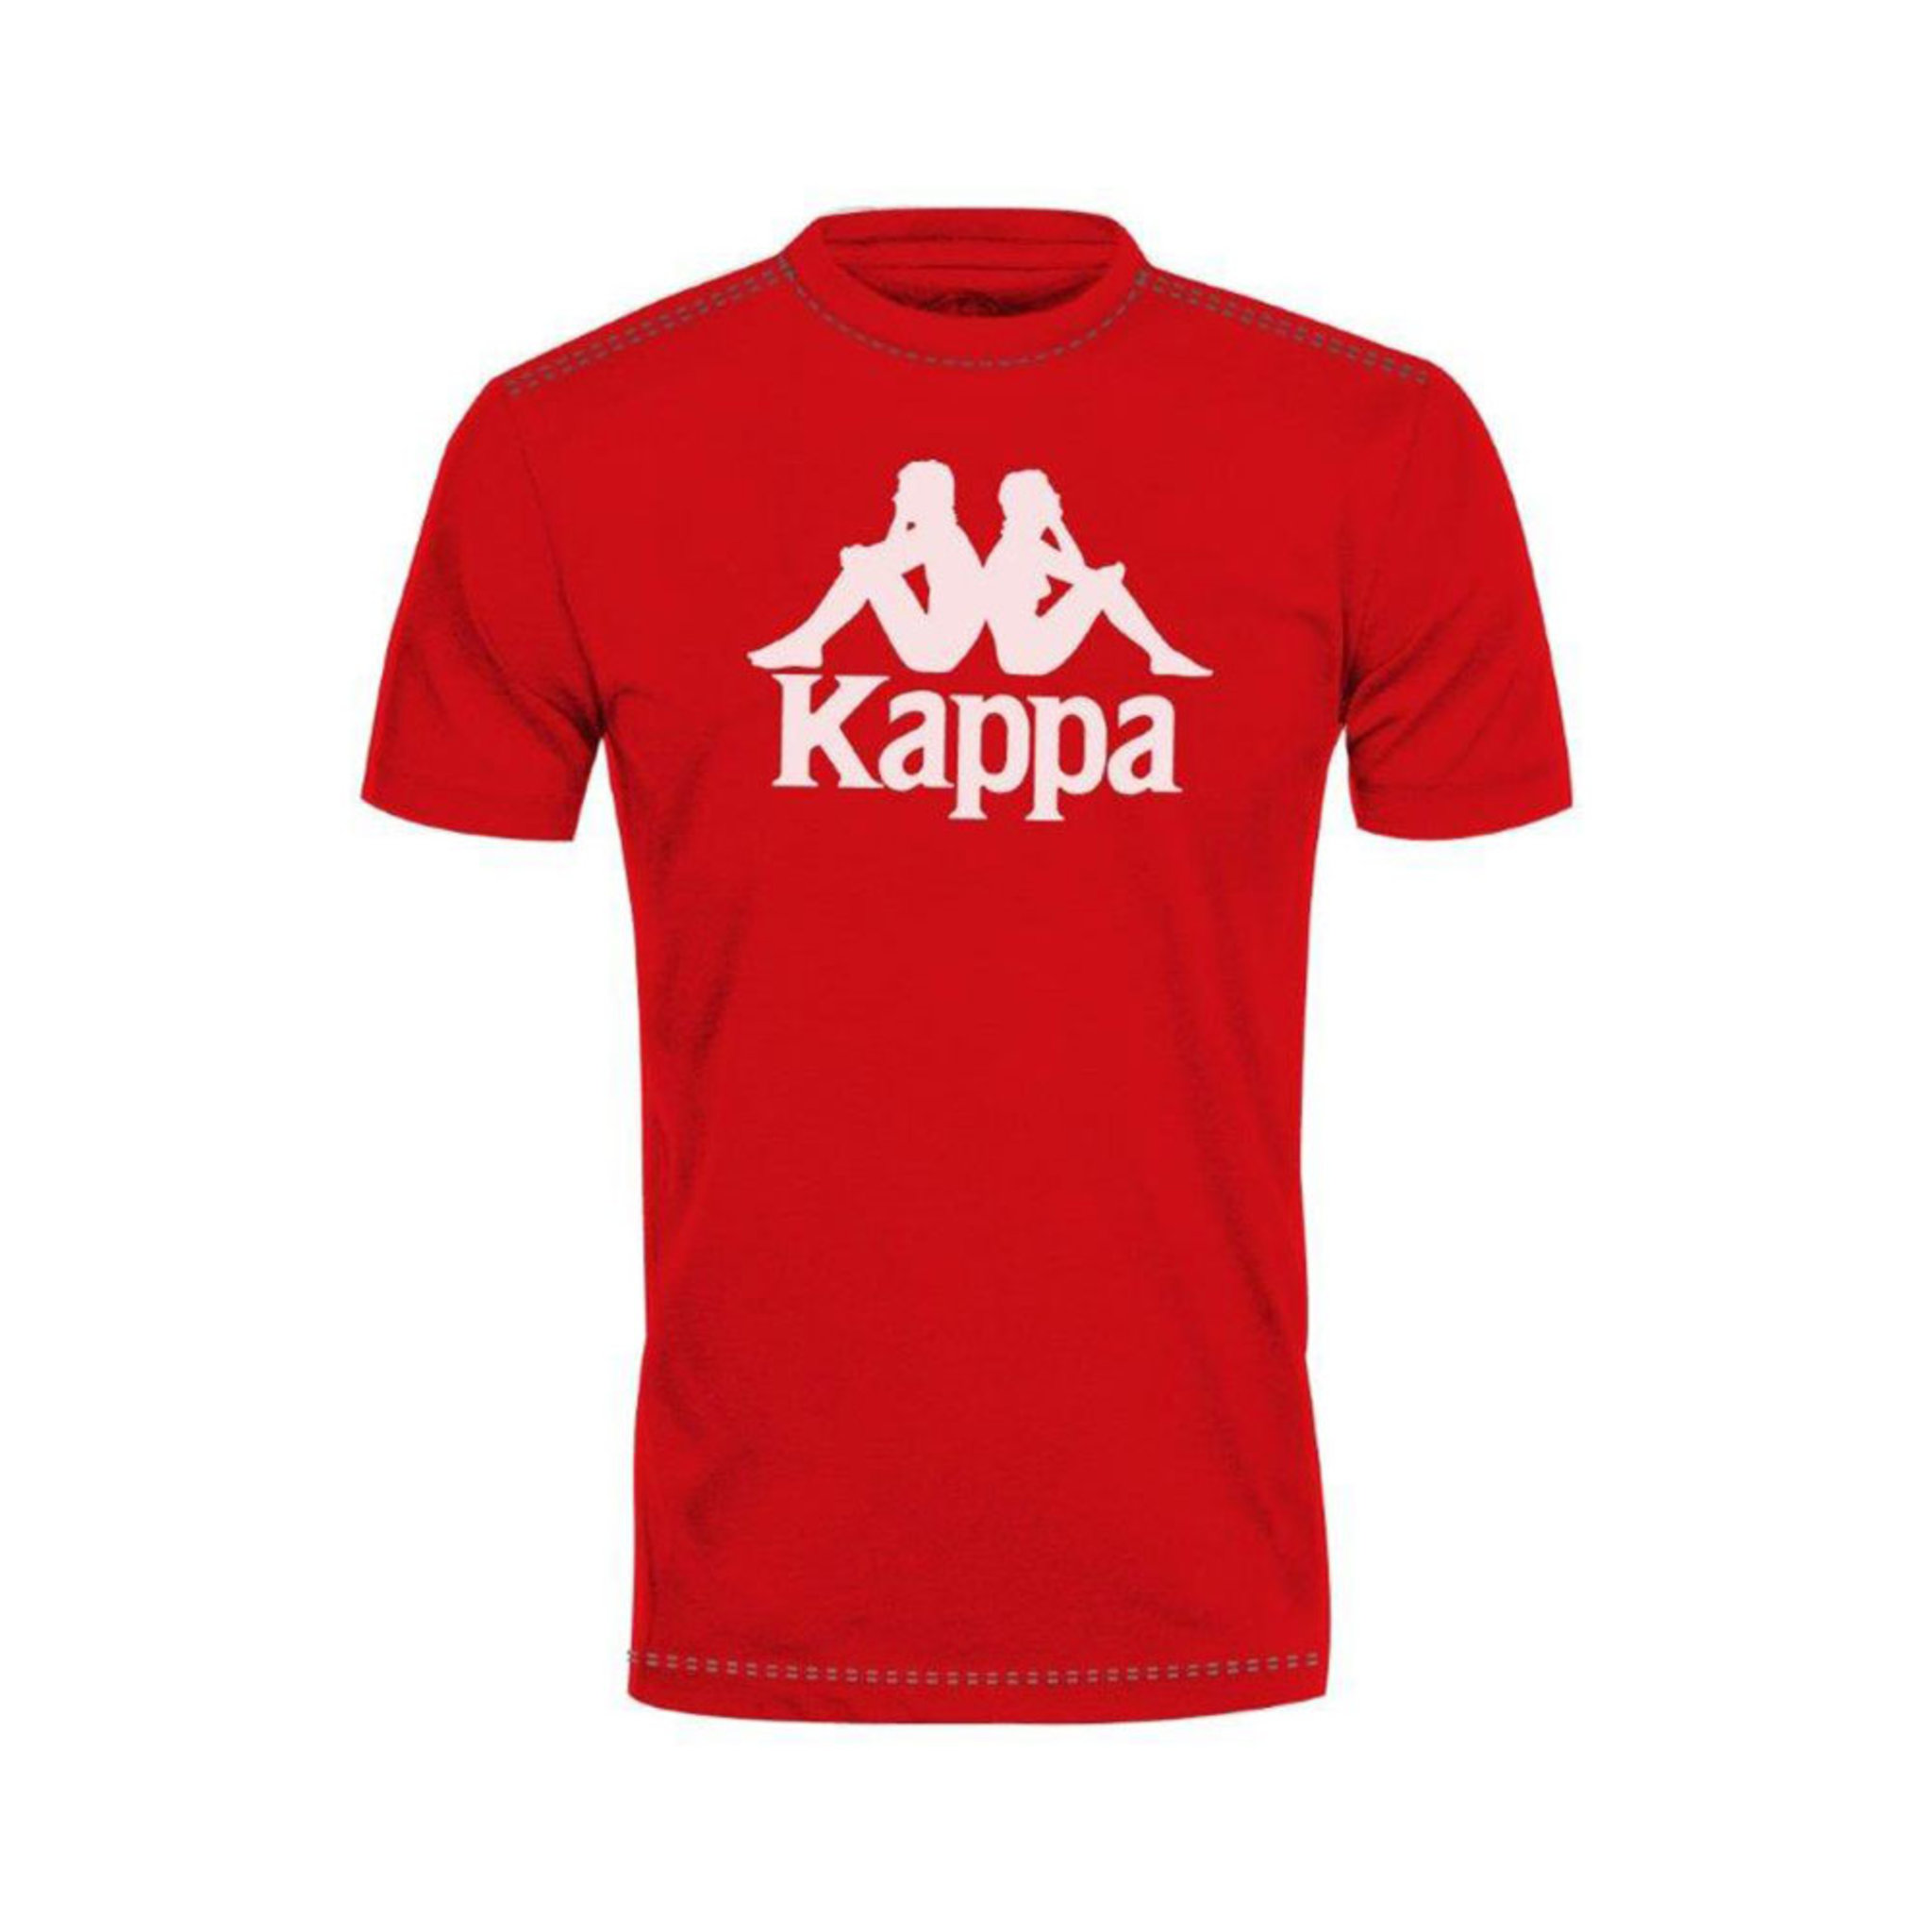 T-shirt, Red-with